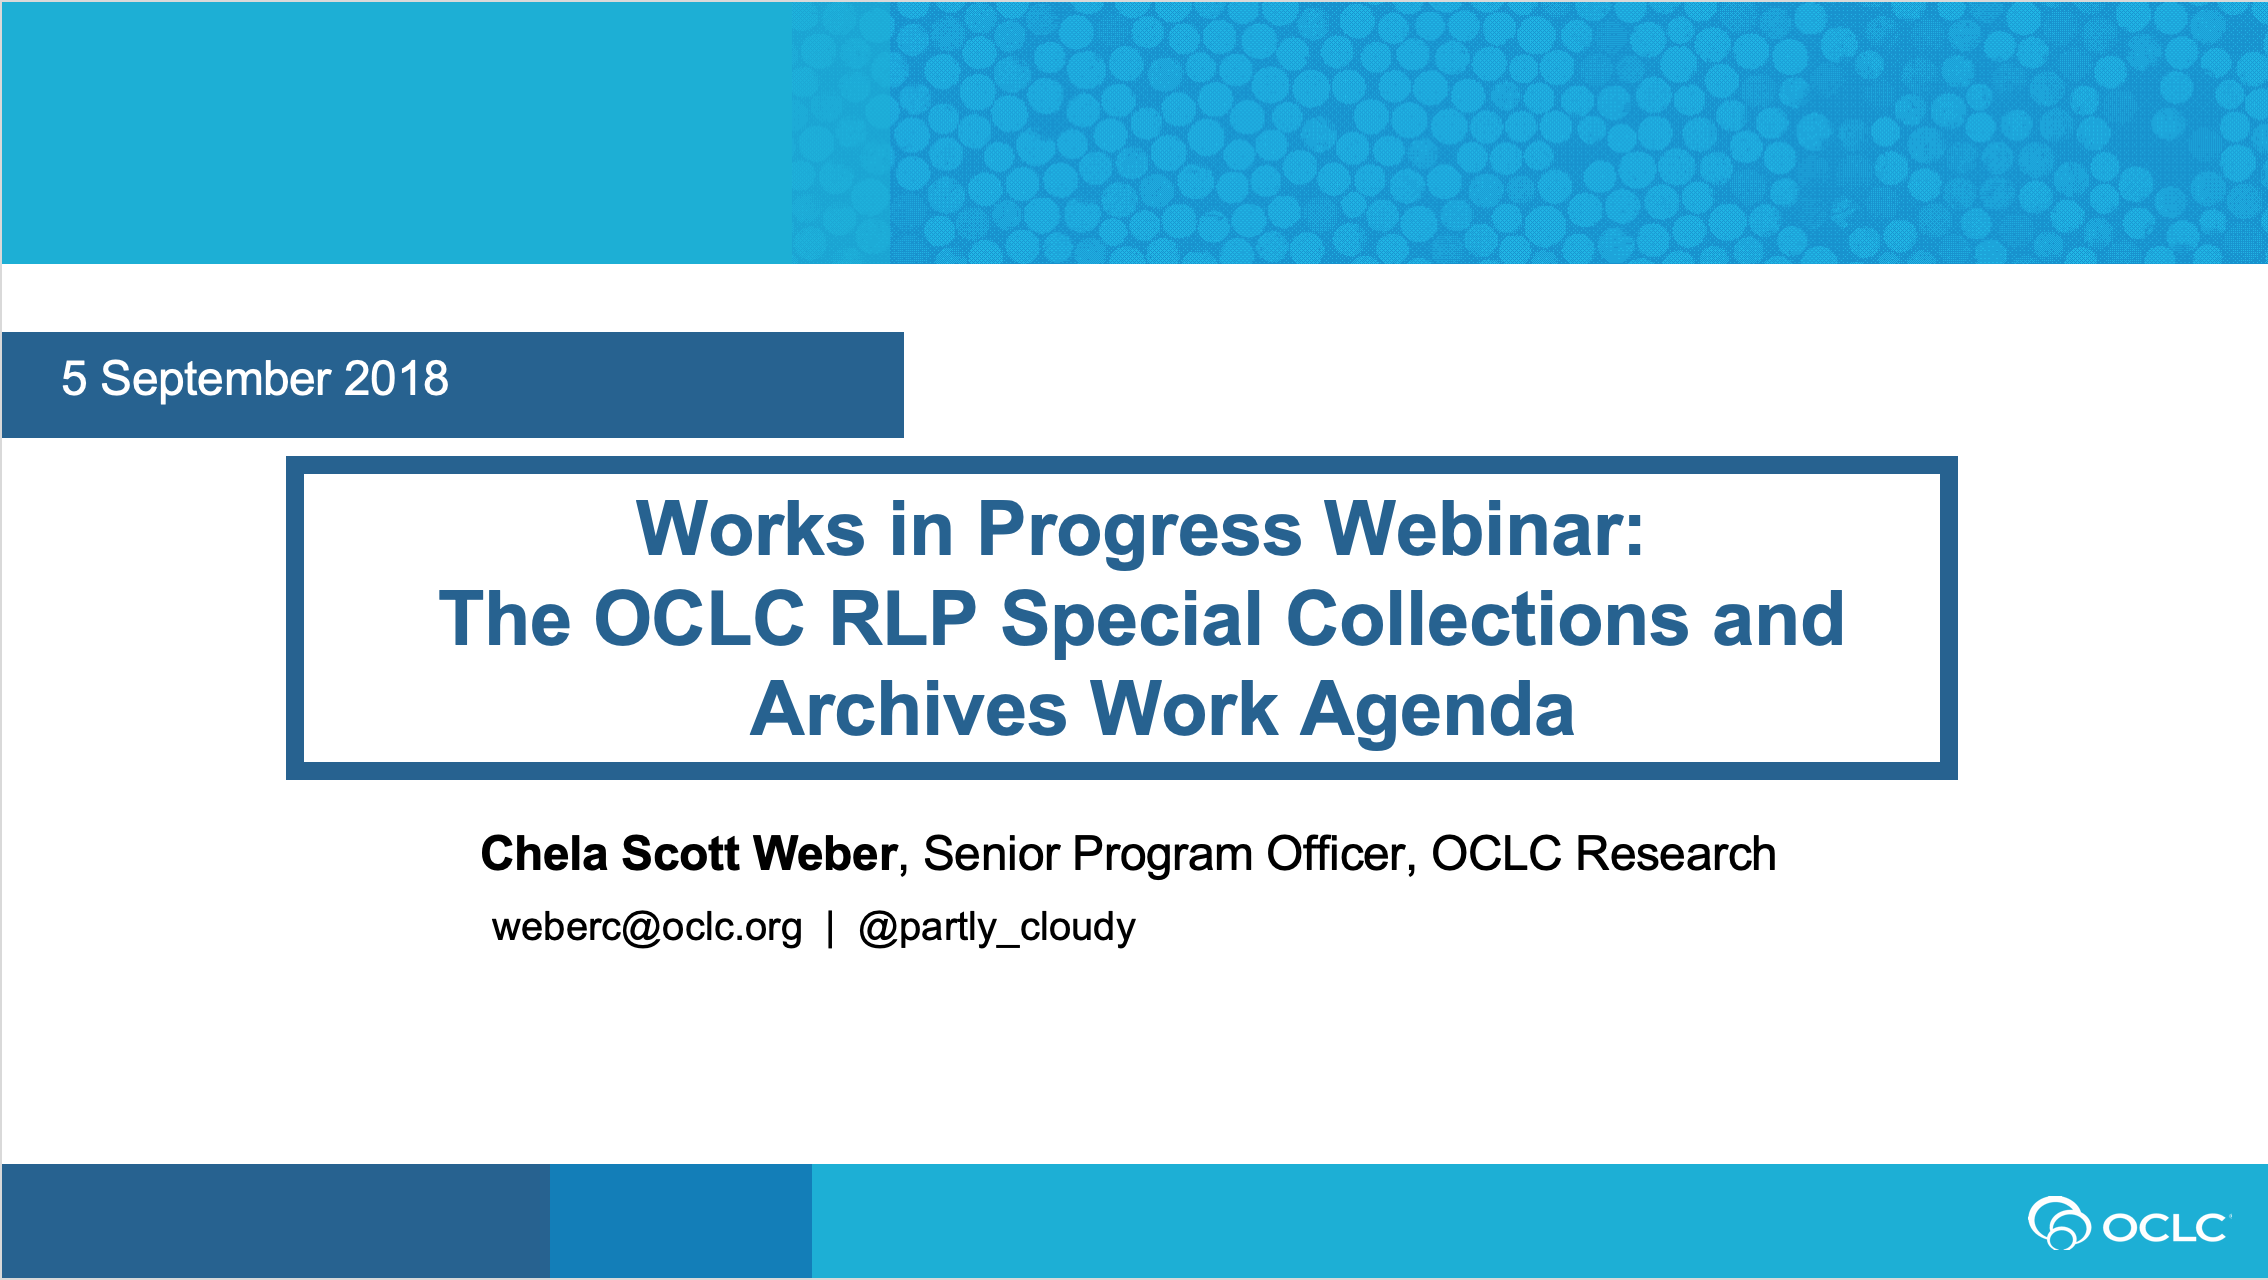 The OCLC RLP Special Collections and Archives Work Agenda (video)